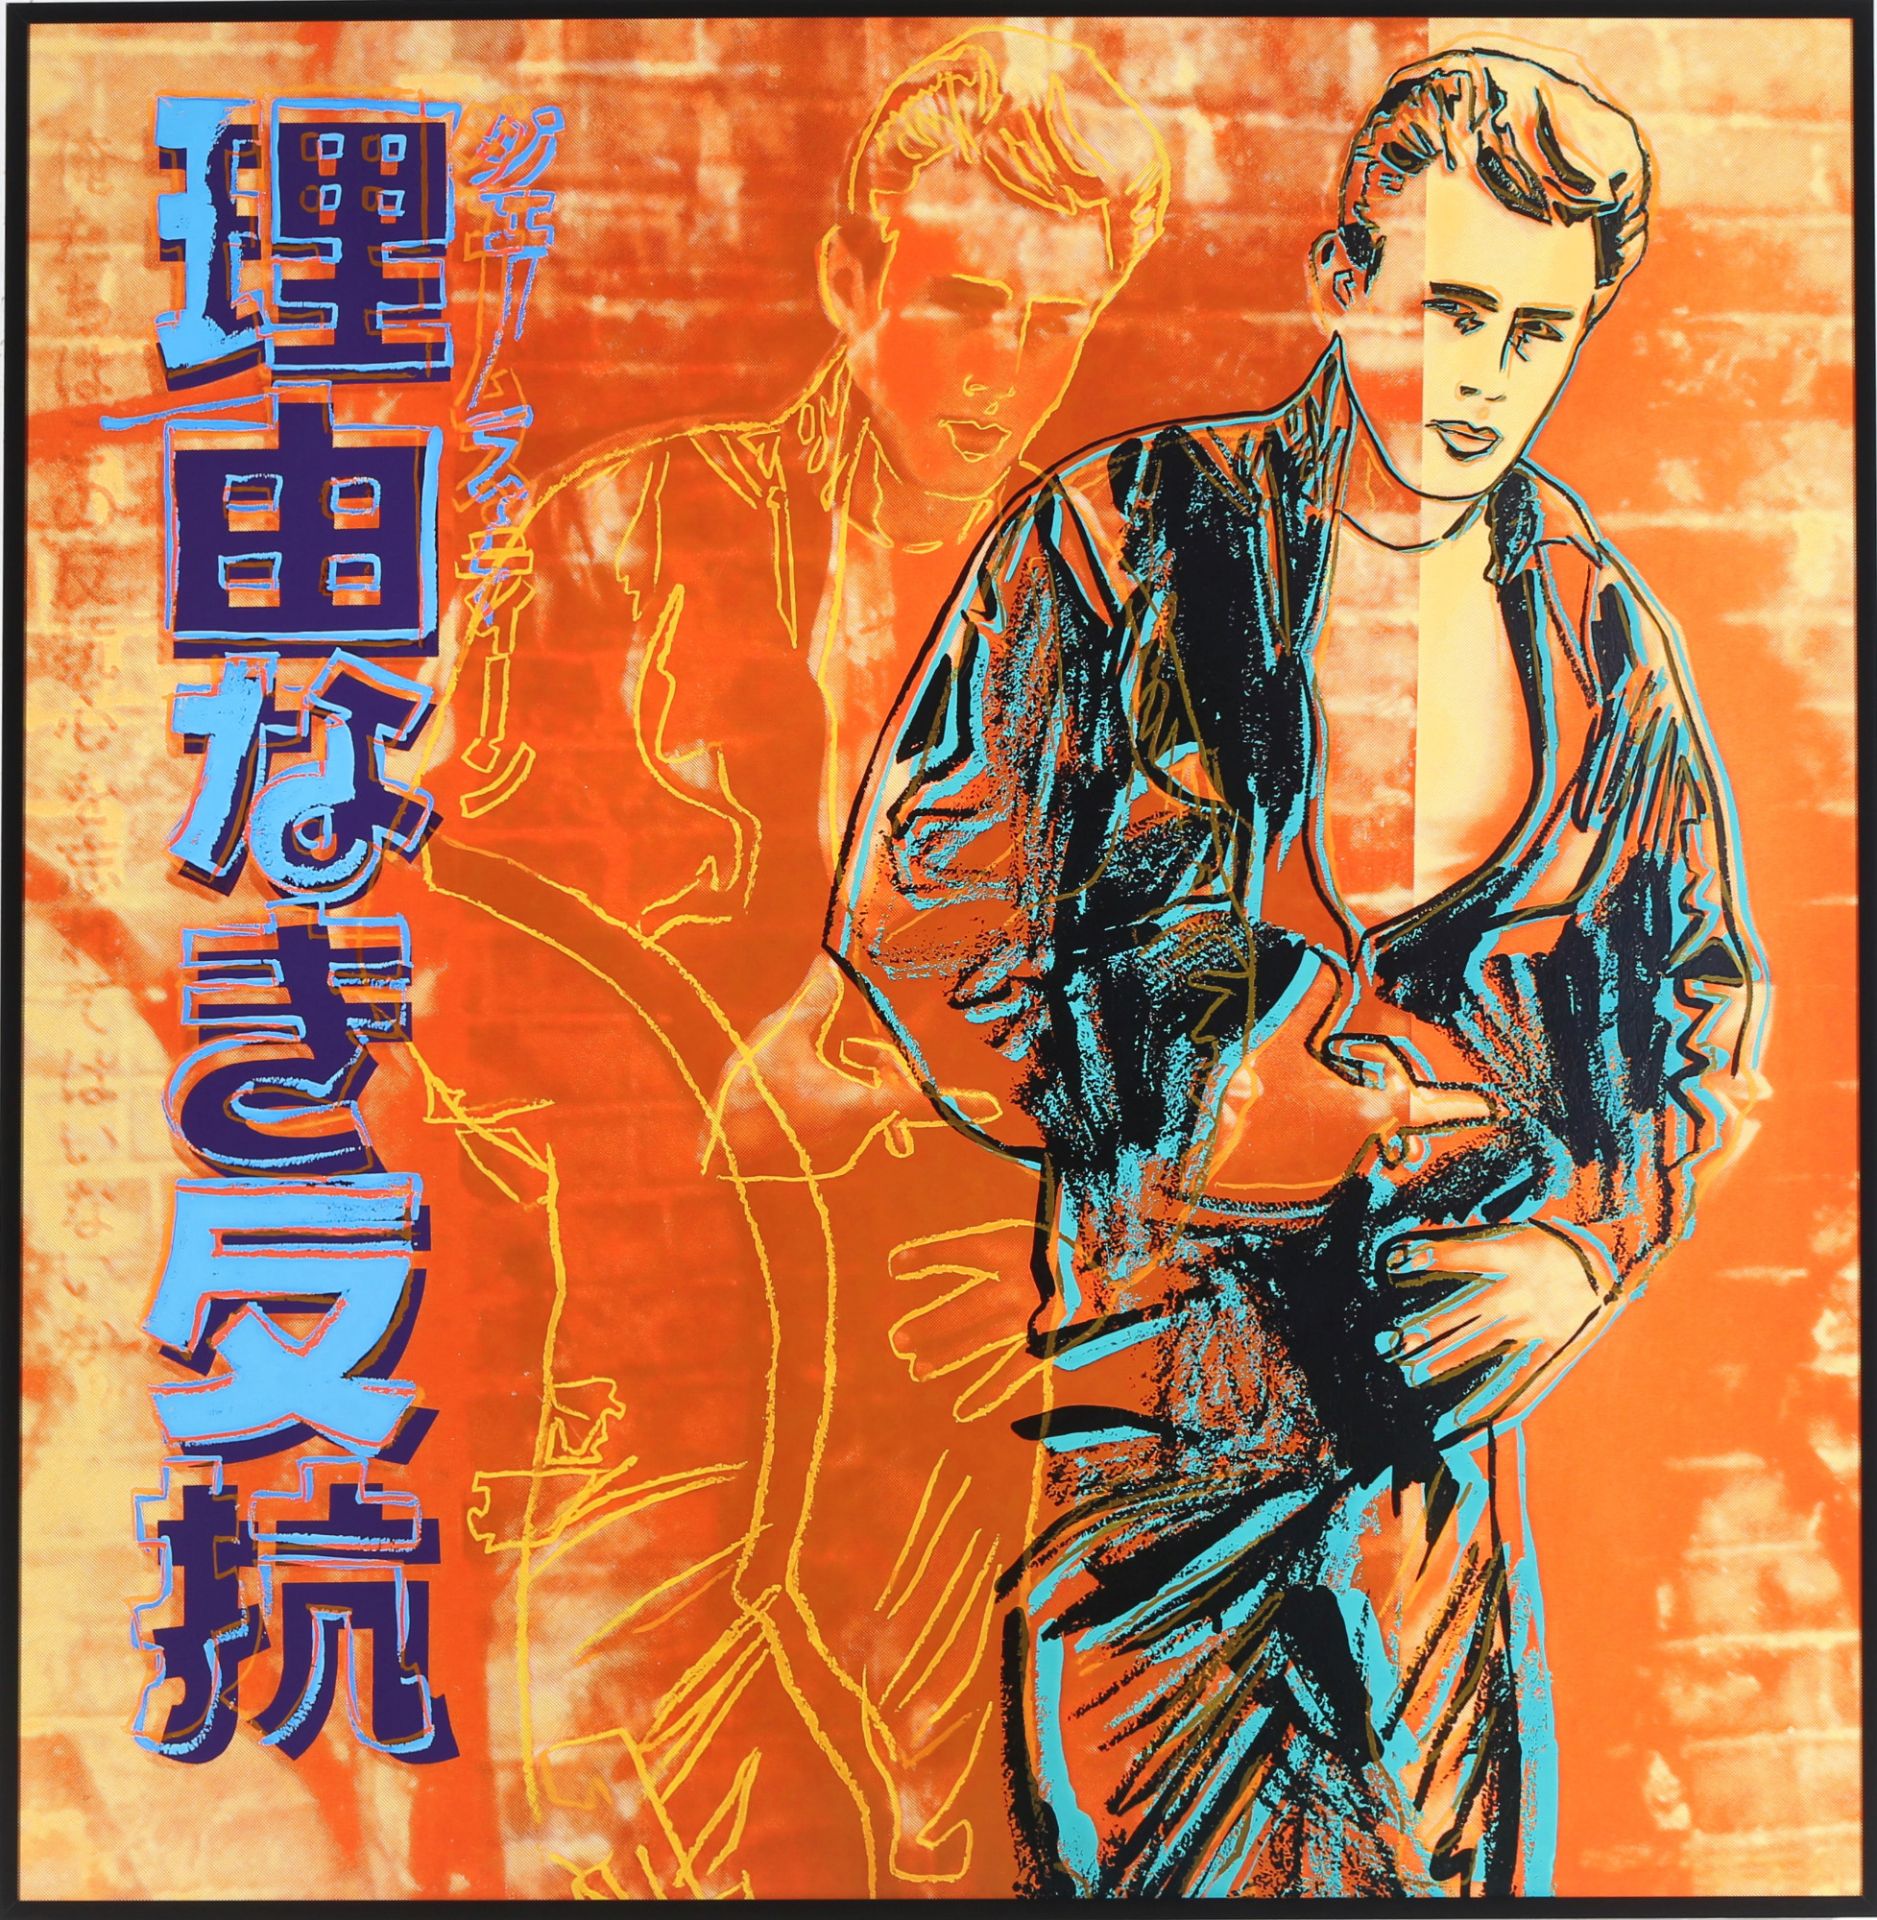 Andy Warhol (1928-1987) James Dean - Rebel Without a Cause 1984, Ronald Feldman, großer Siebdruck, - Image 2 of 2